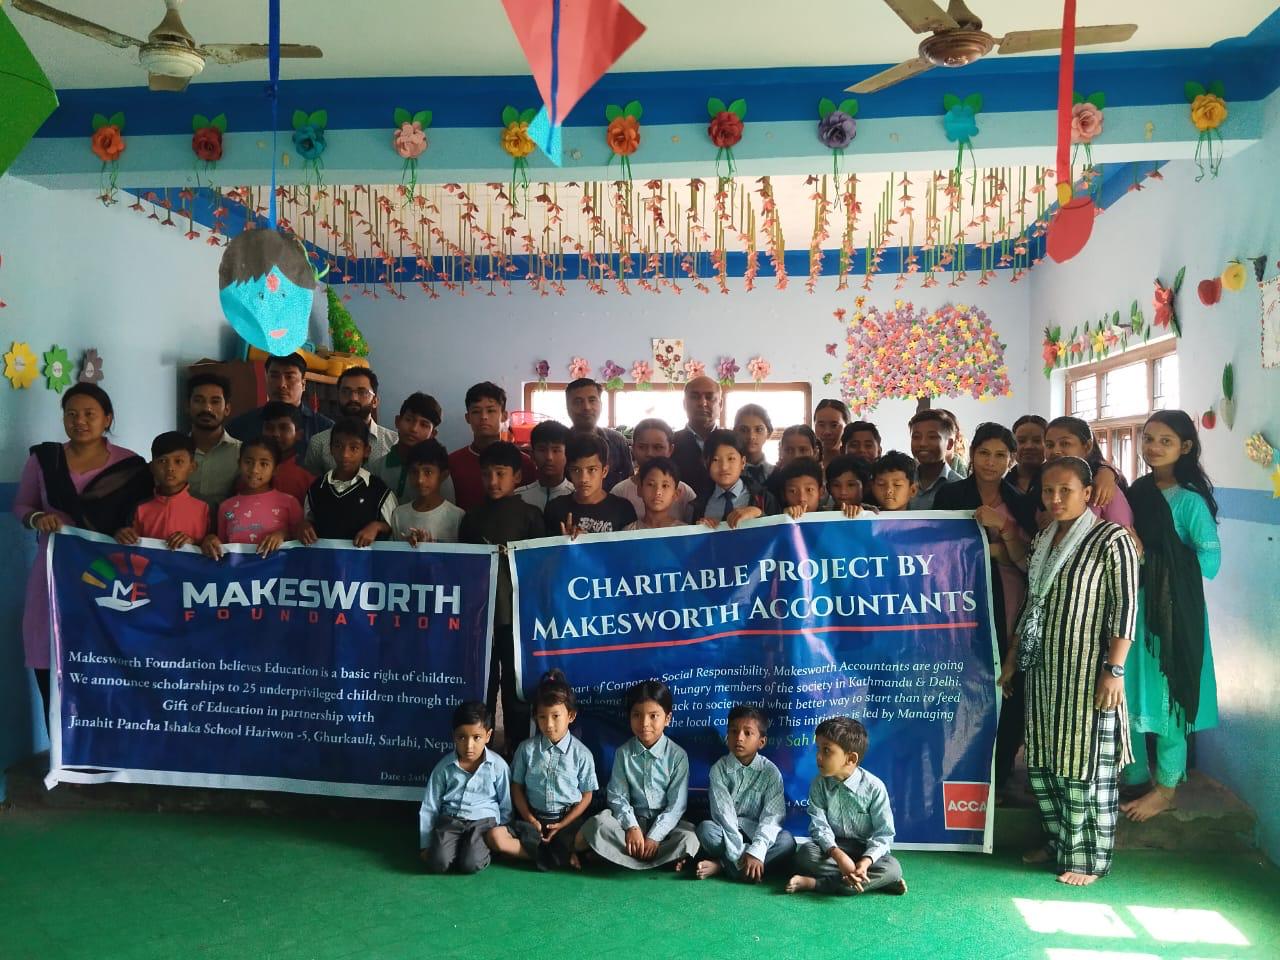 Sponsoring the Full Time Education of 25 school-age children for the entire year through Makesworth Foundation